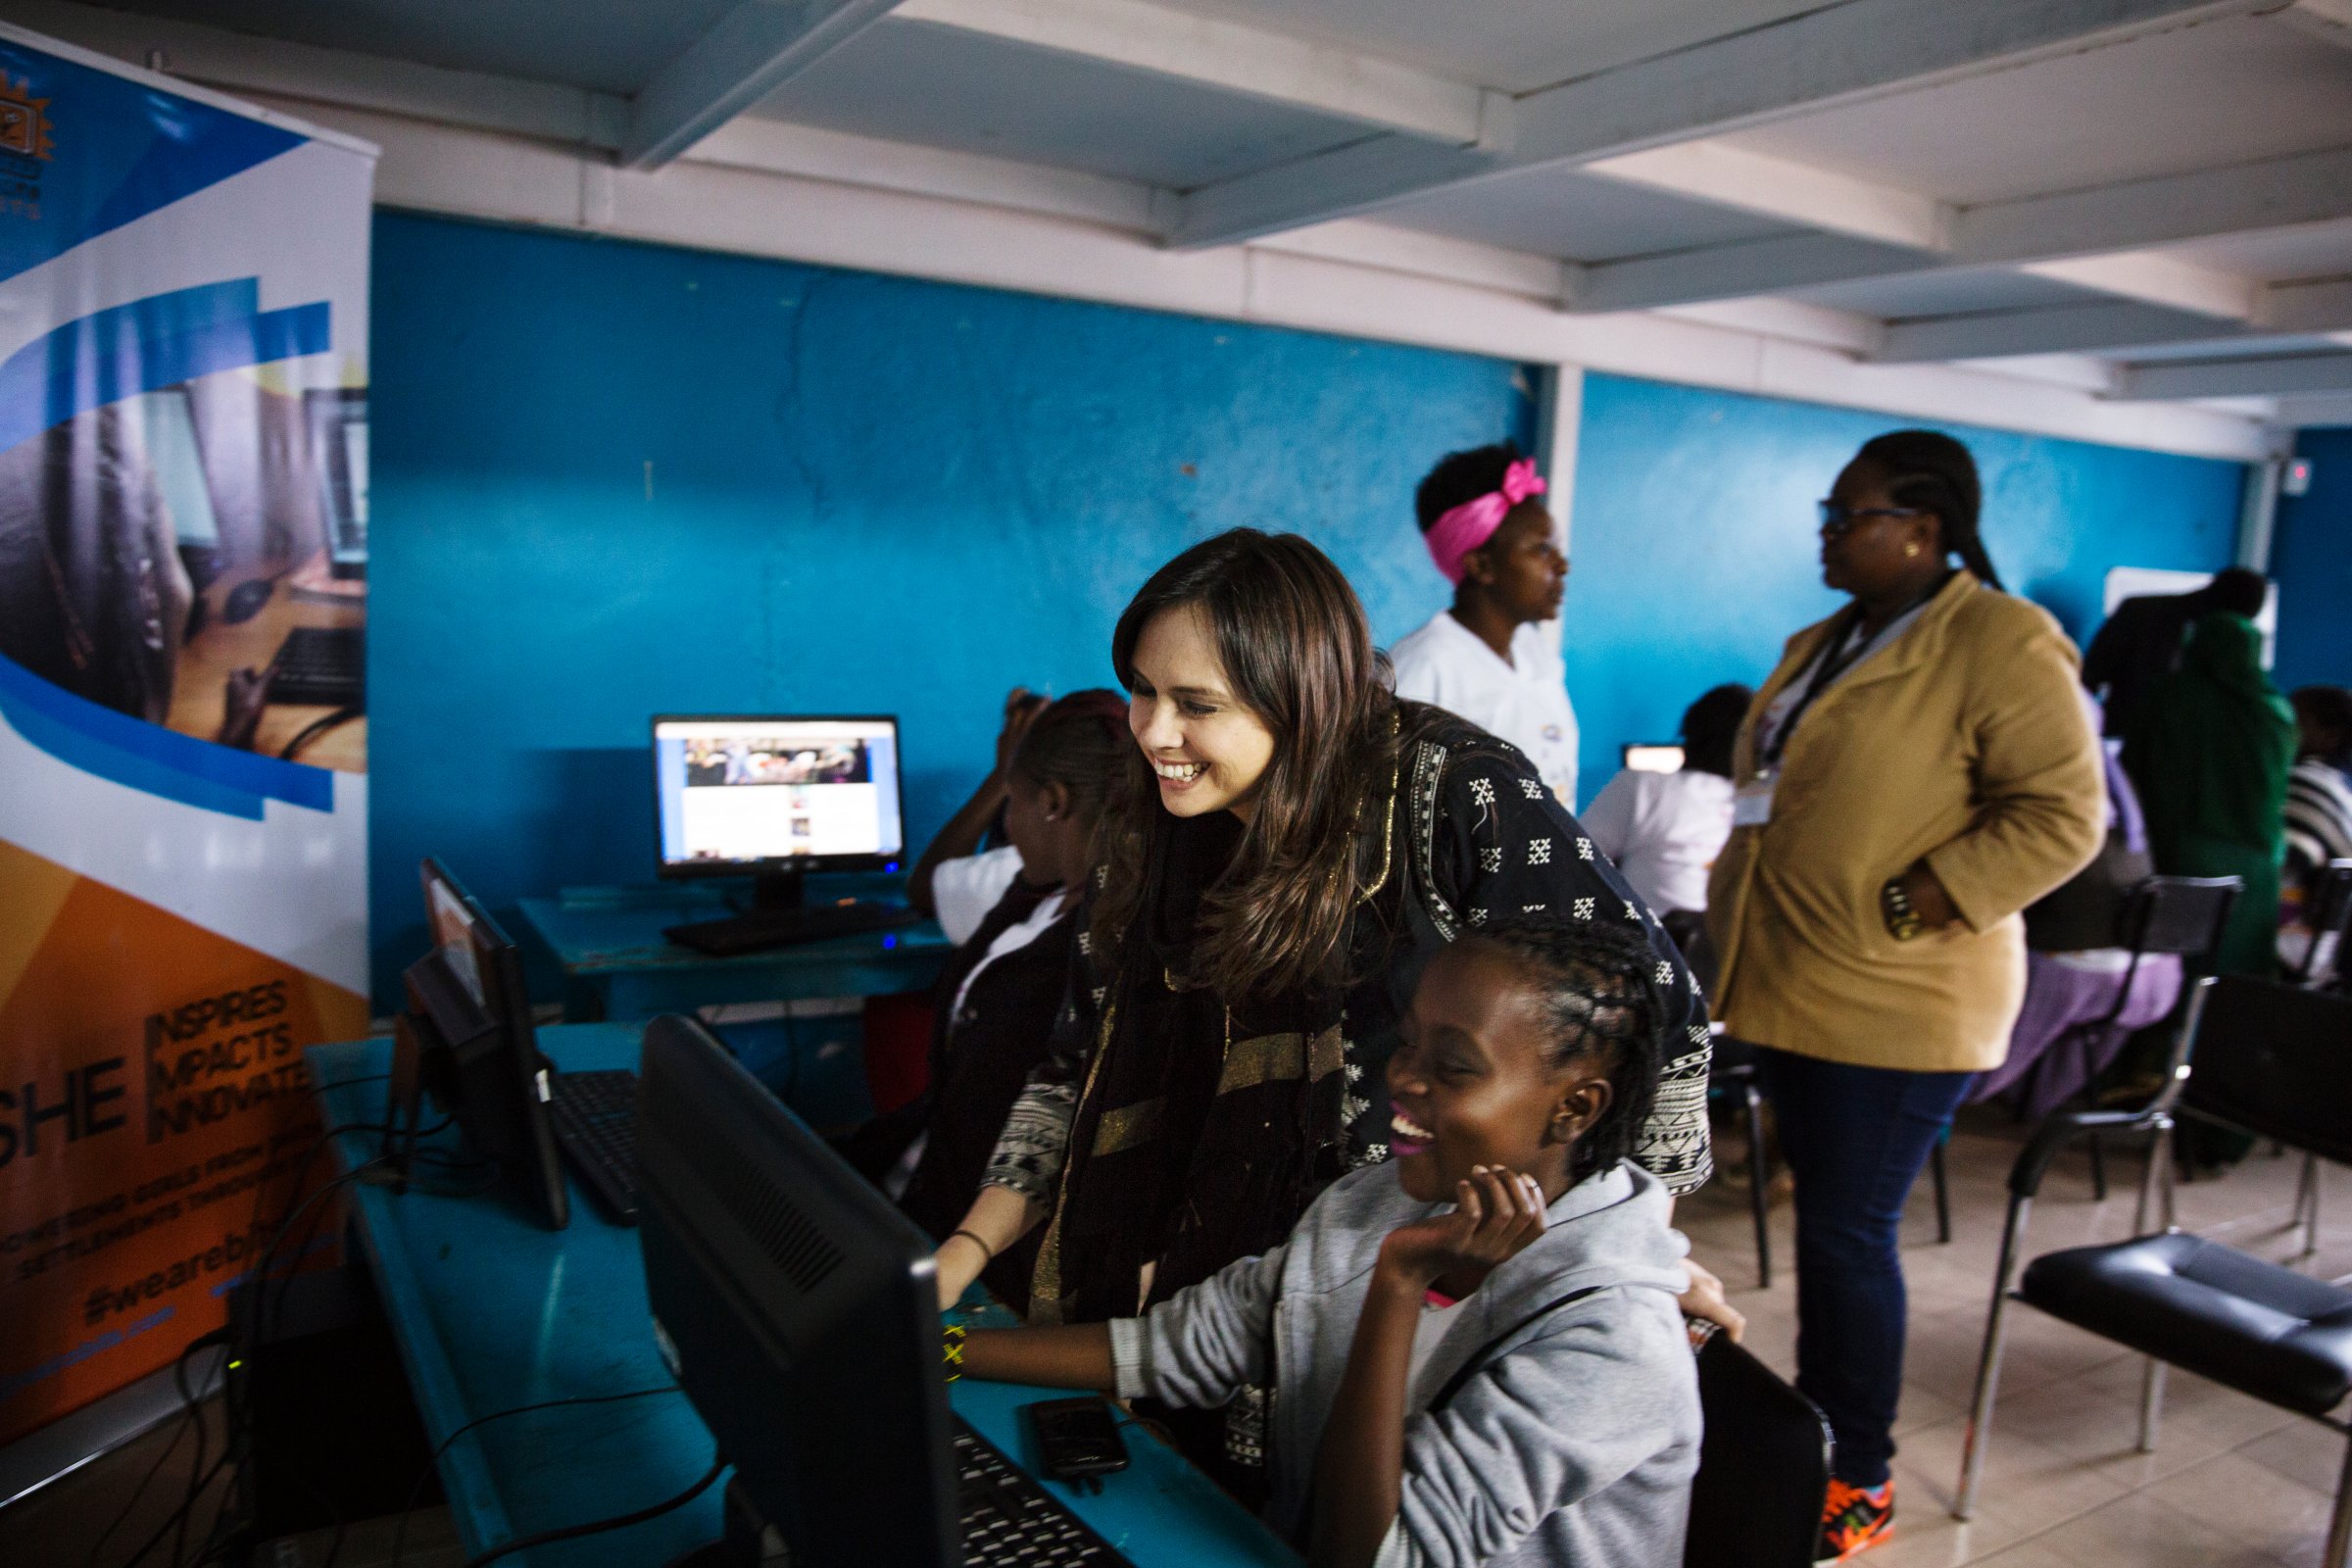 Malala spent a day with Kenyan girls' during their technology class at Nairobits.